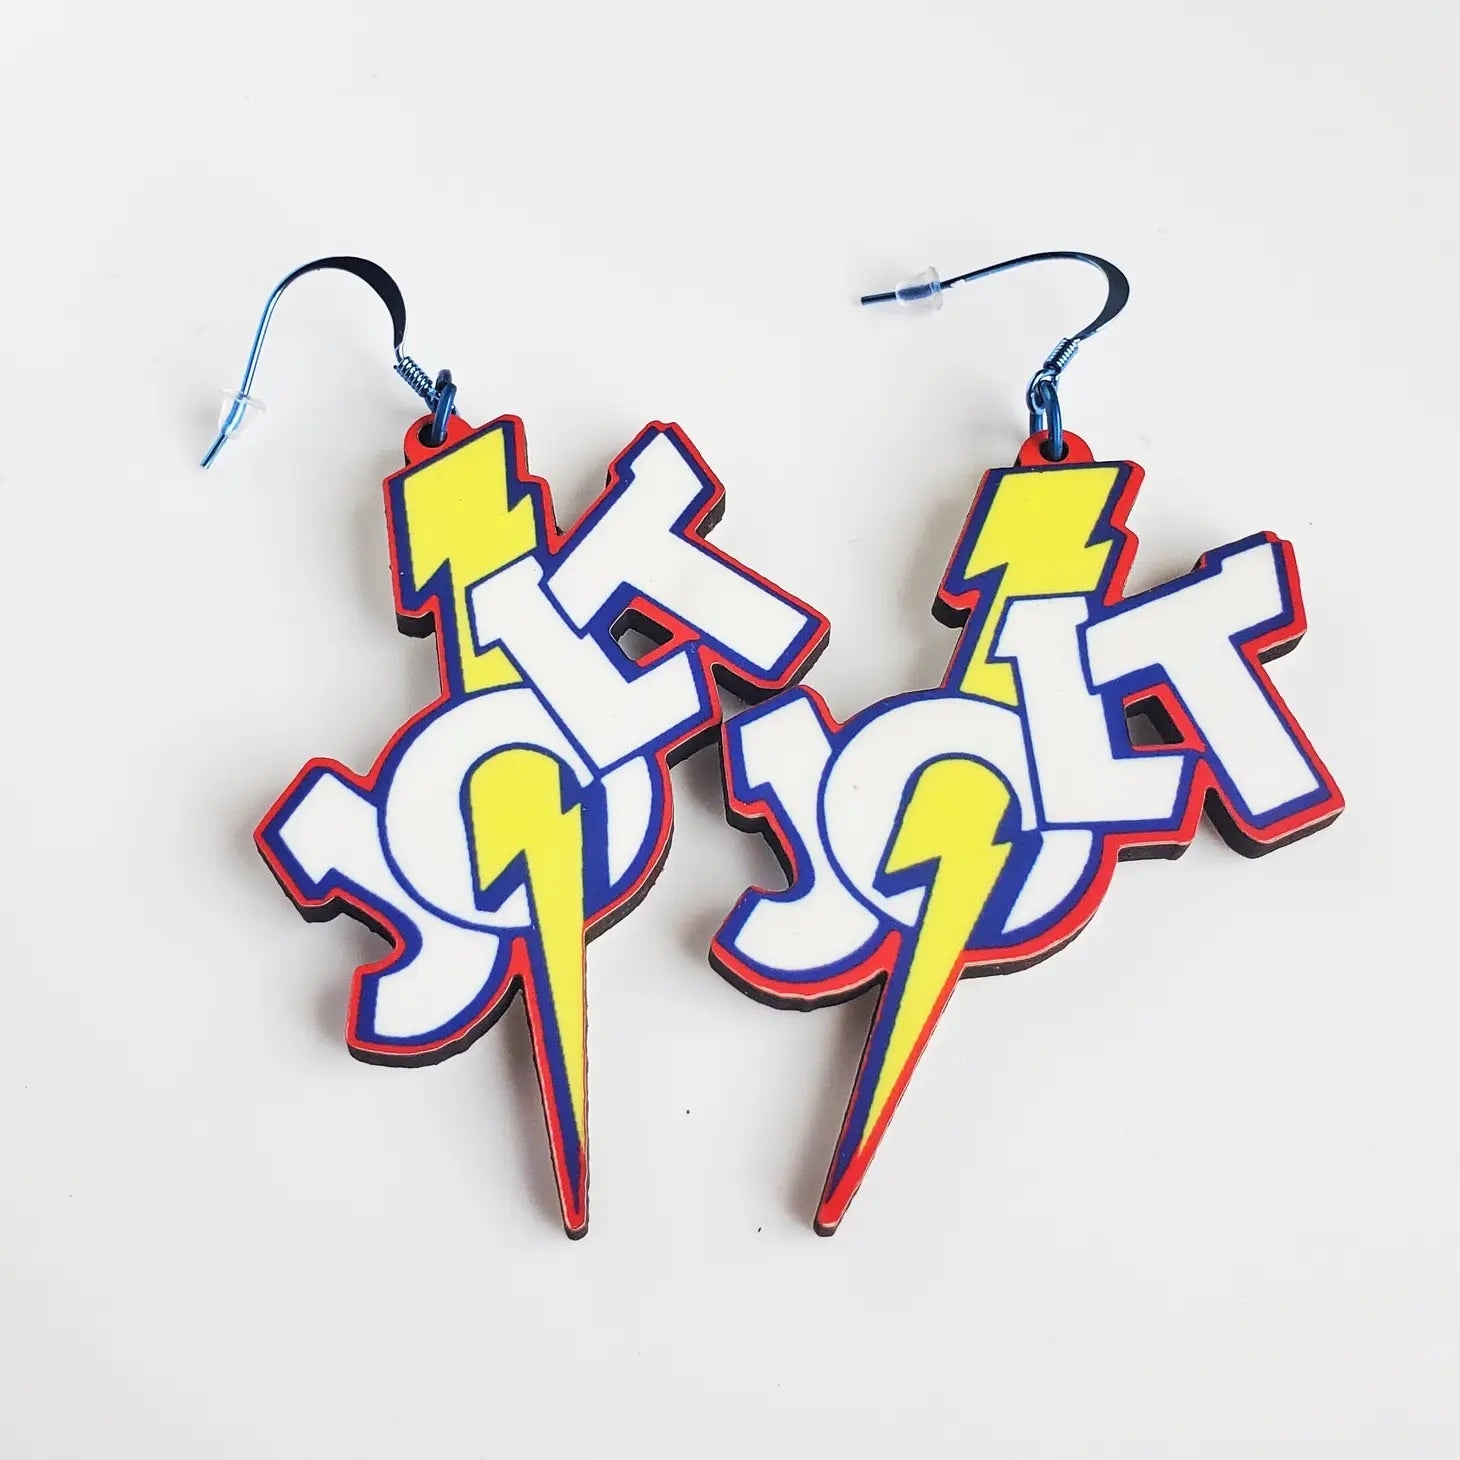 A pair of dangle earrings in the shape of the Jolt Cola logo